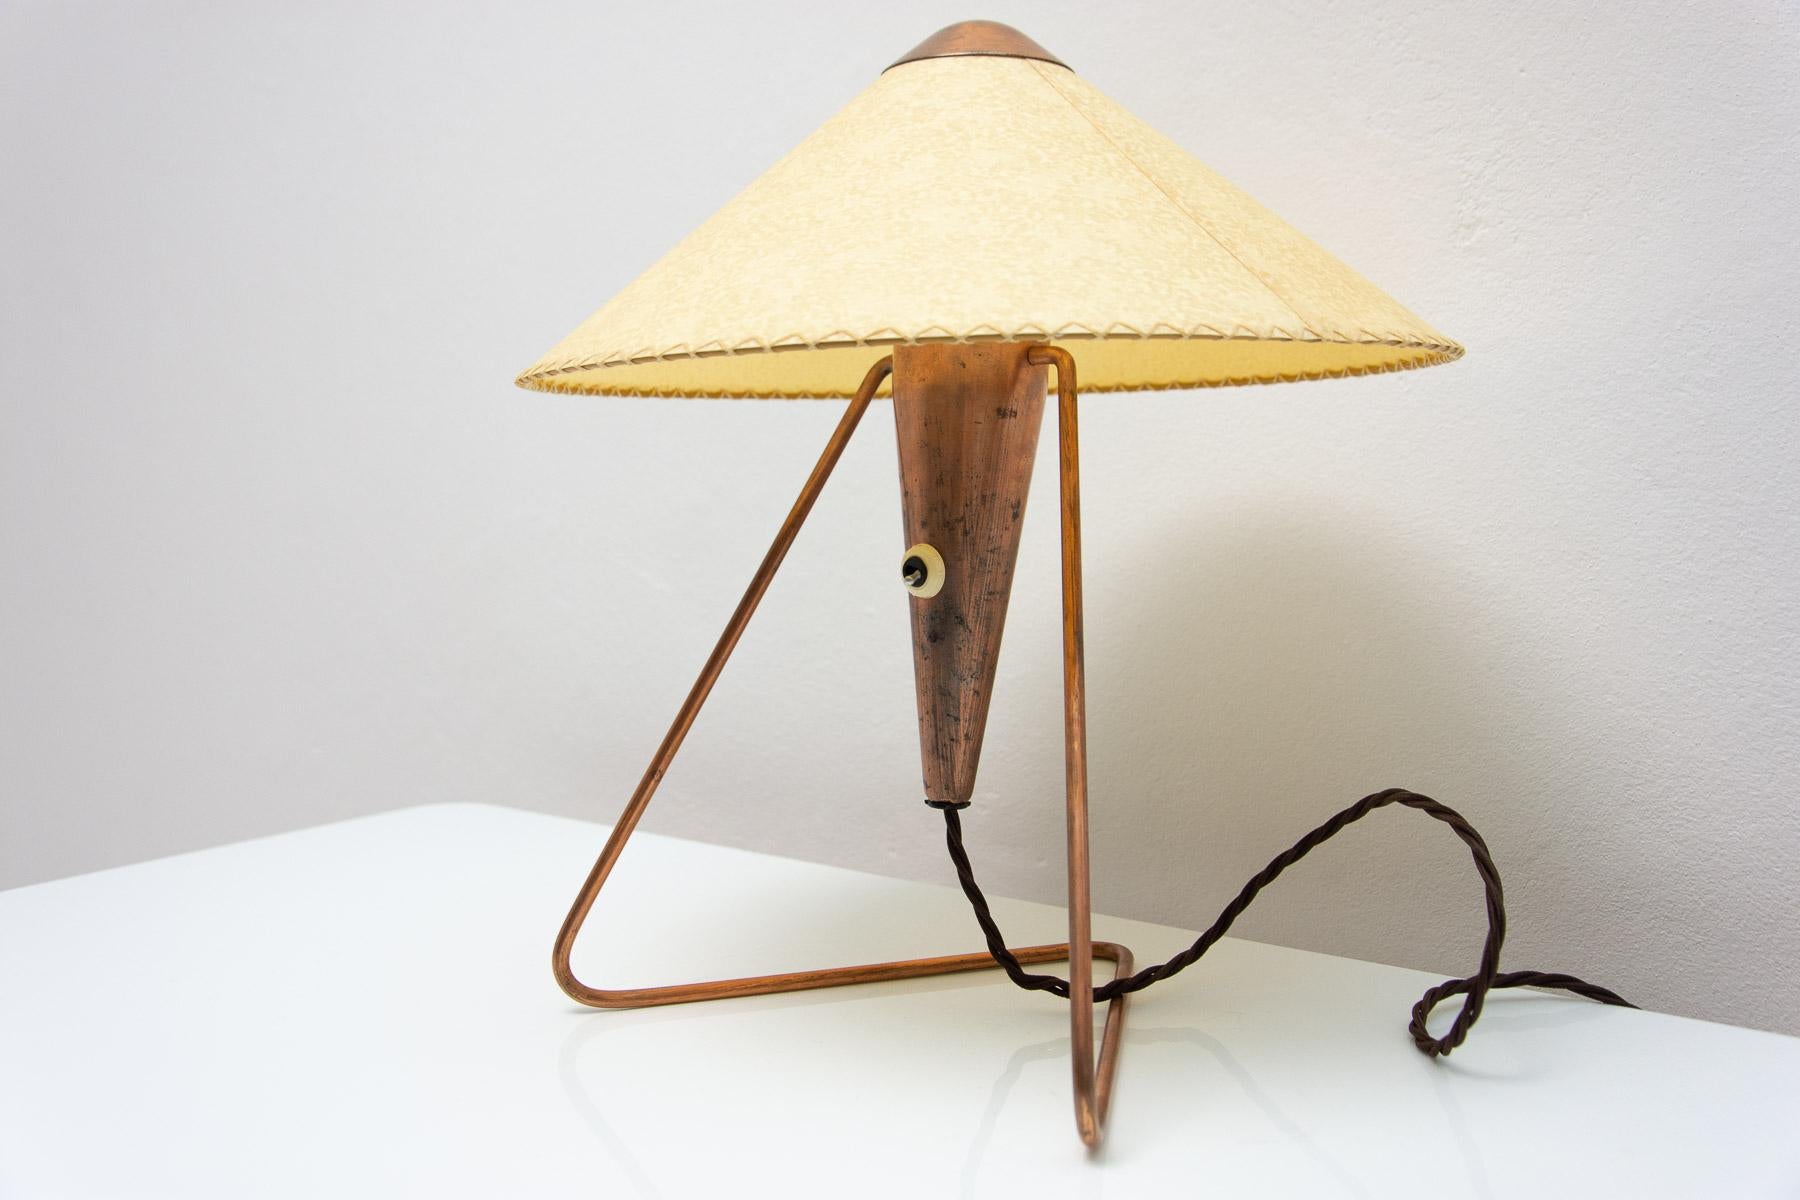 Mid century modern desk lamp was designed by Helena Frantova and produced by Okolo in the 1950 in the former Czechoslovakia. It´s made of brass.

This lamp was made by Žukov company.

This table lamp exists in several variations. Made with a